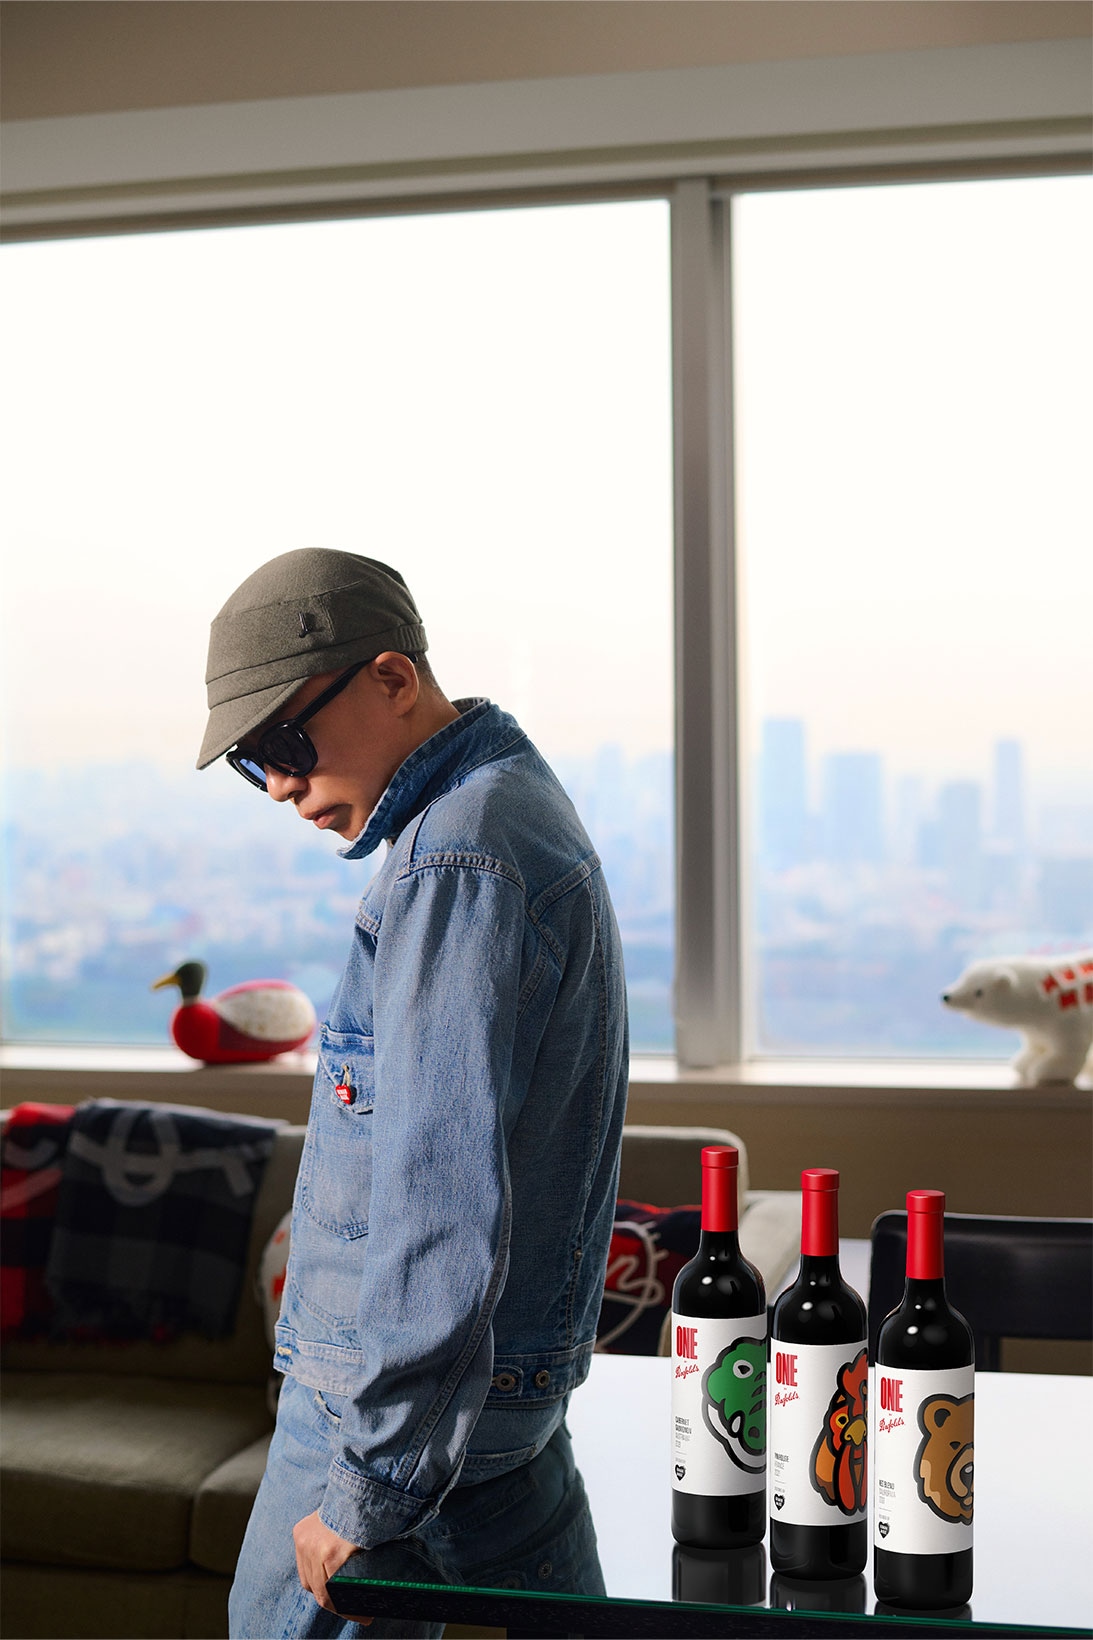 MANIFESTO - HUMAN MADE WINE (LABELS): One by Penfolds